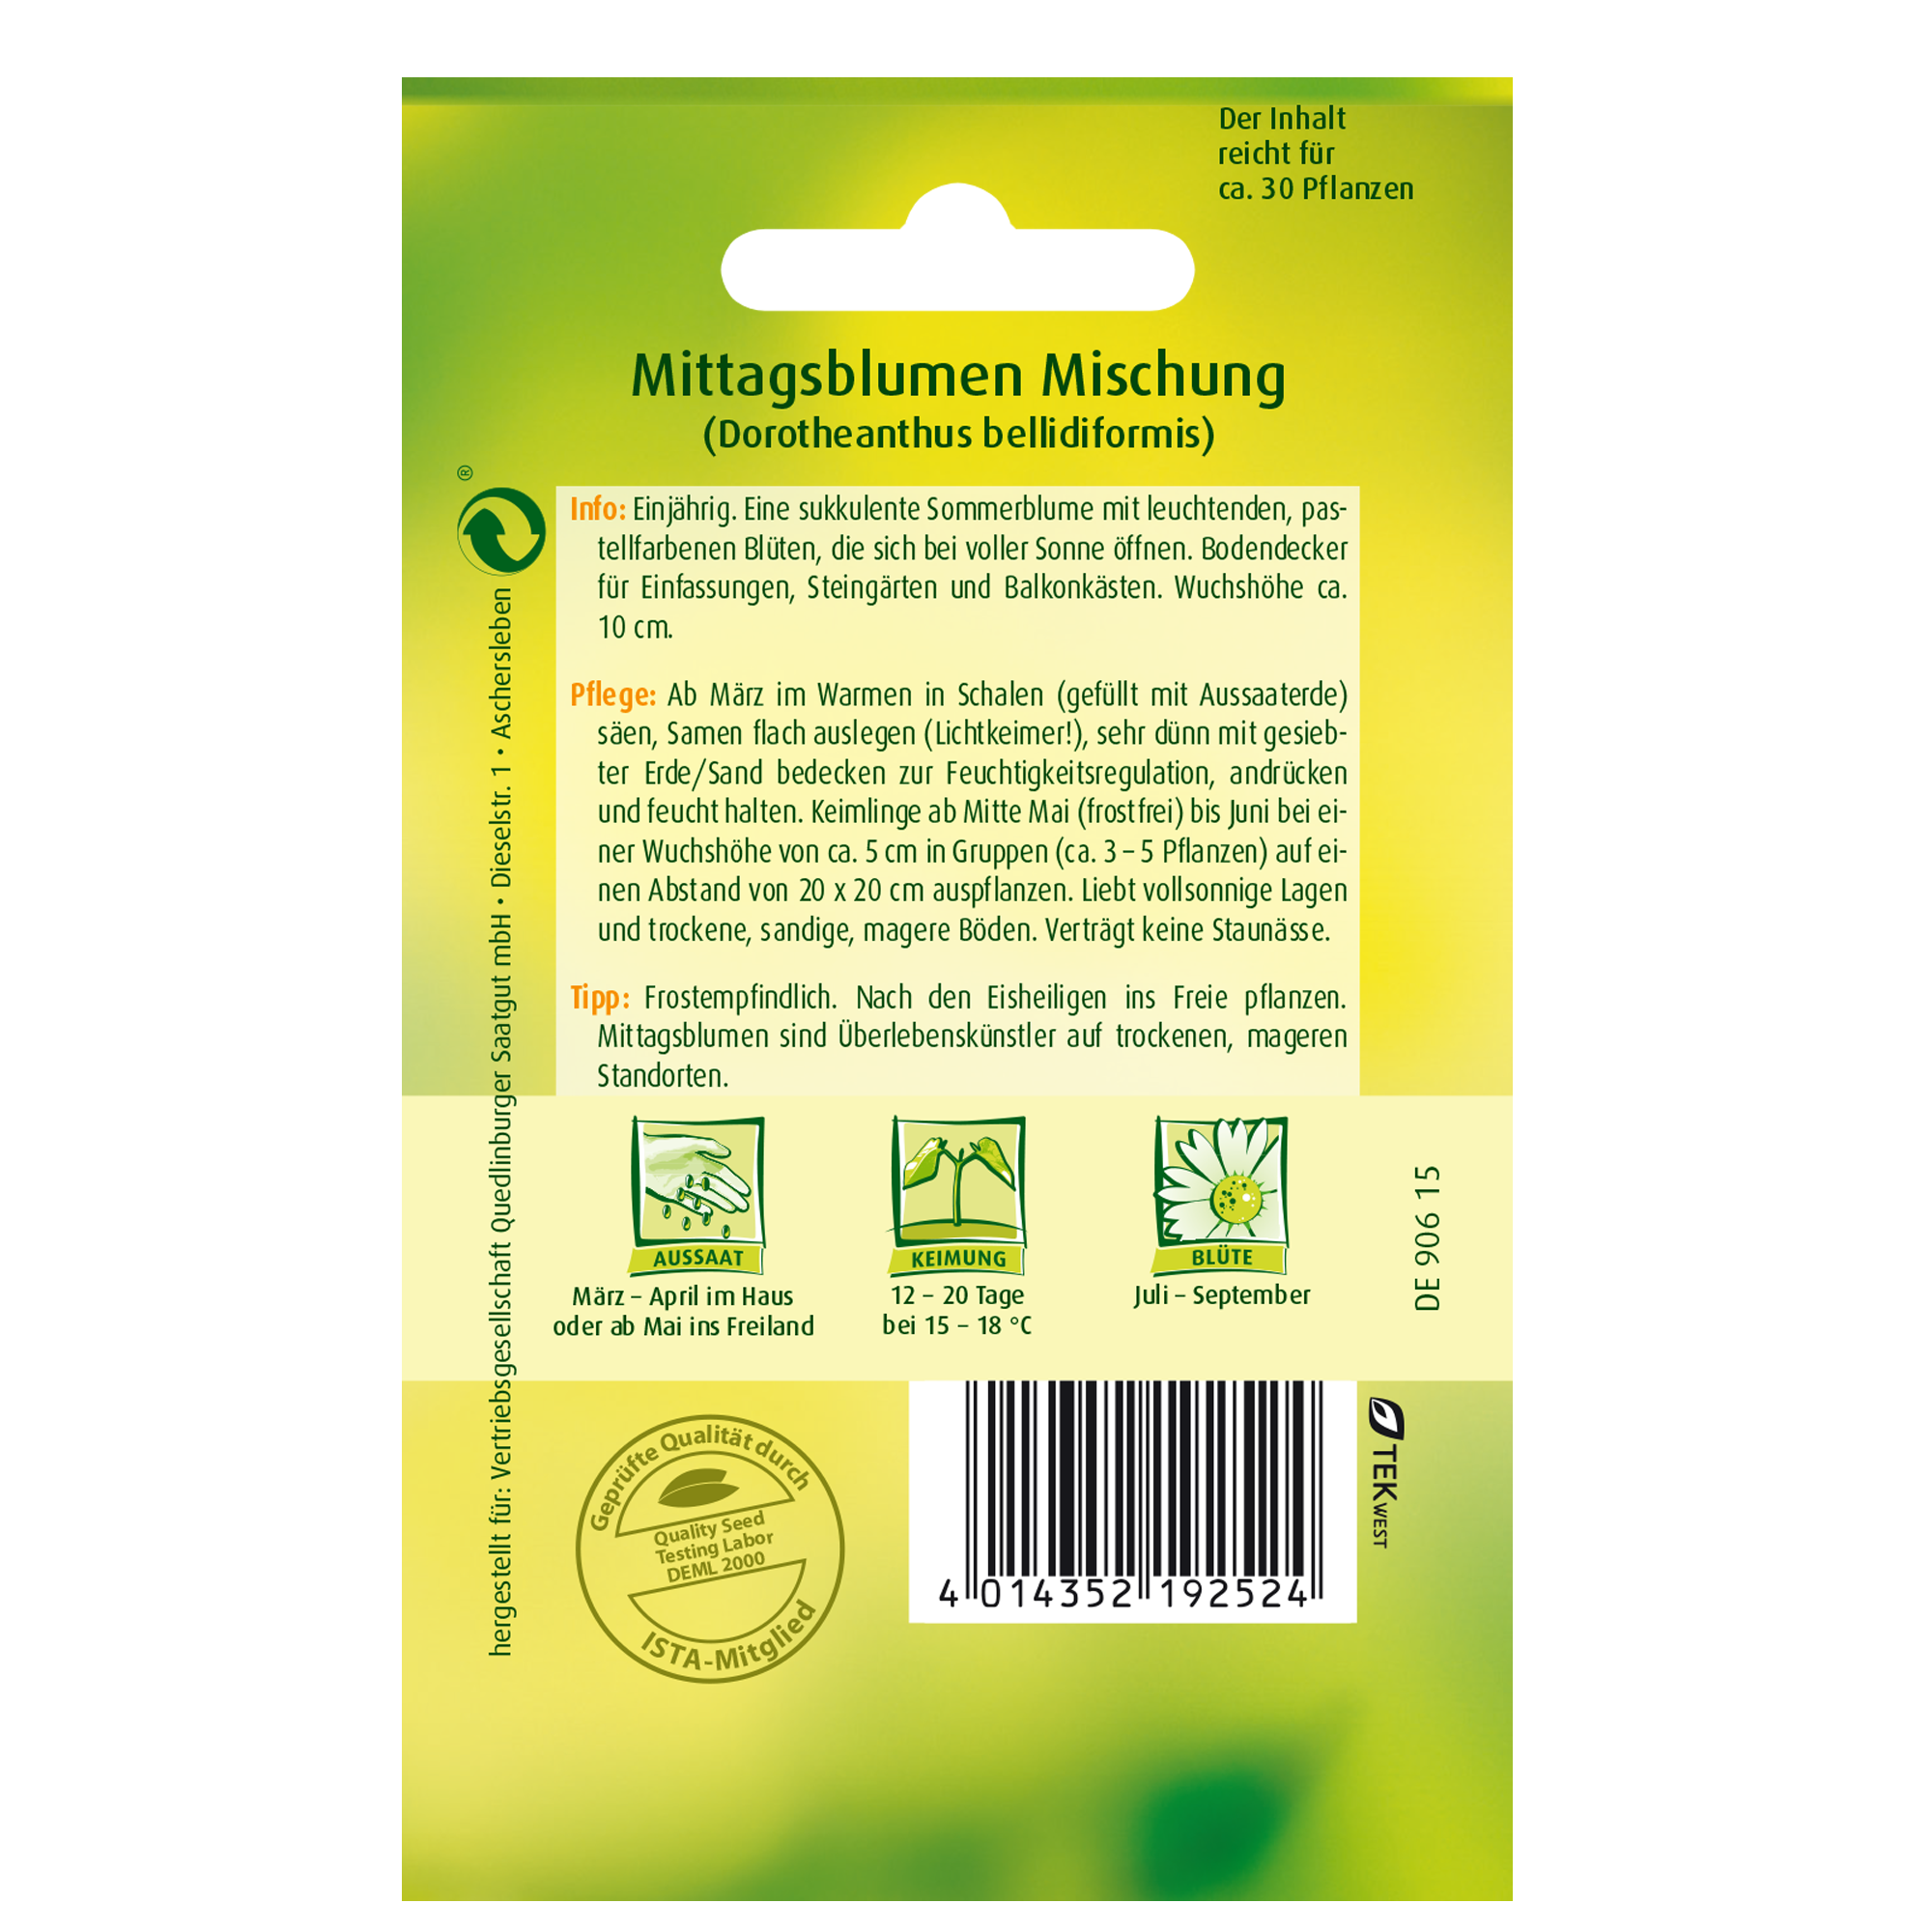 Mittagsblumen Mischung + product picture